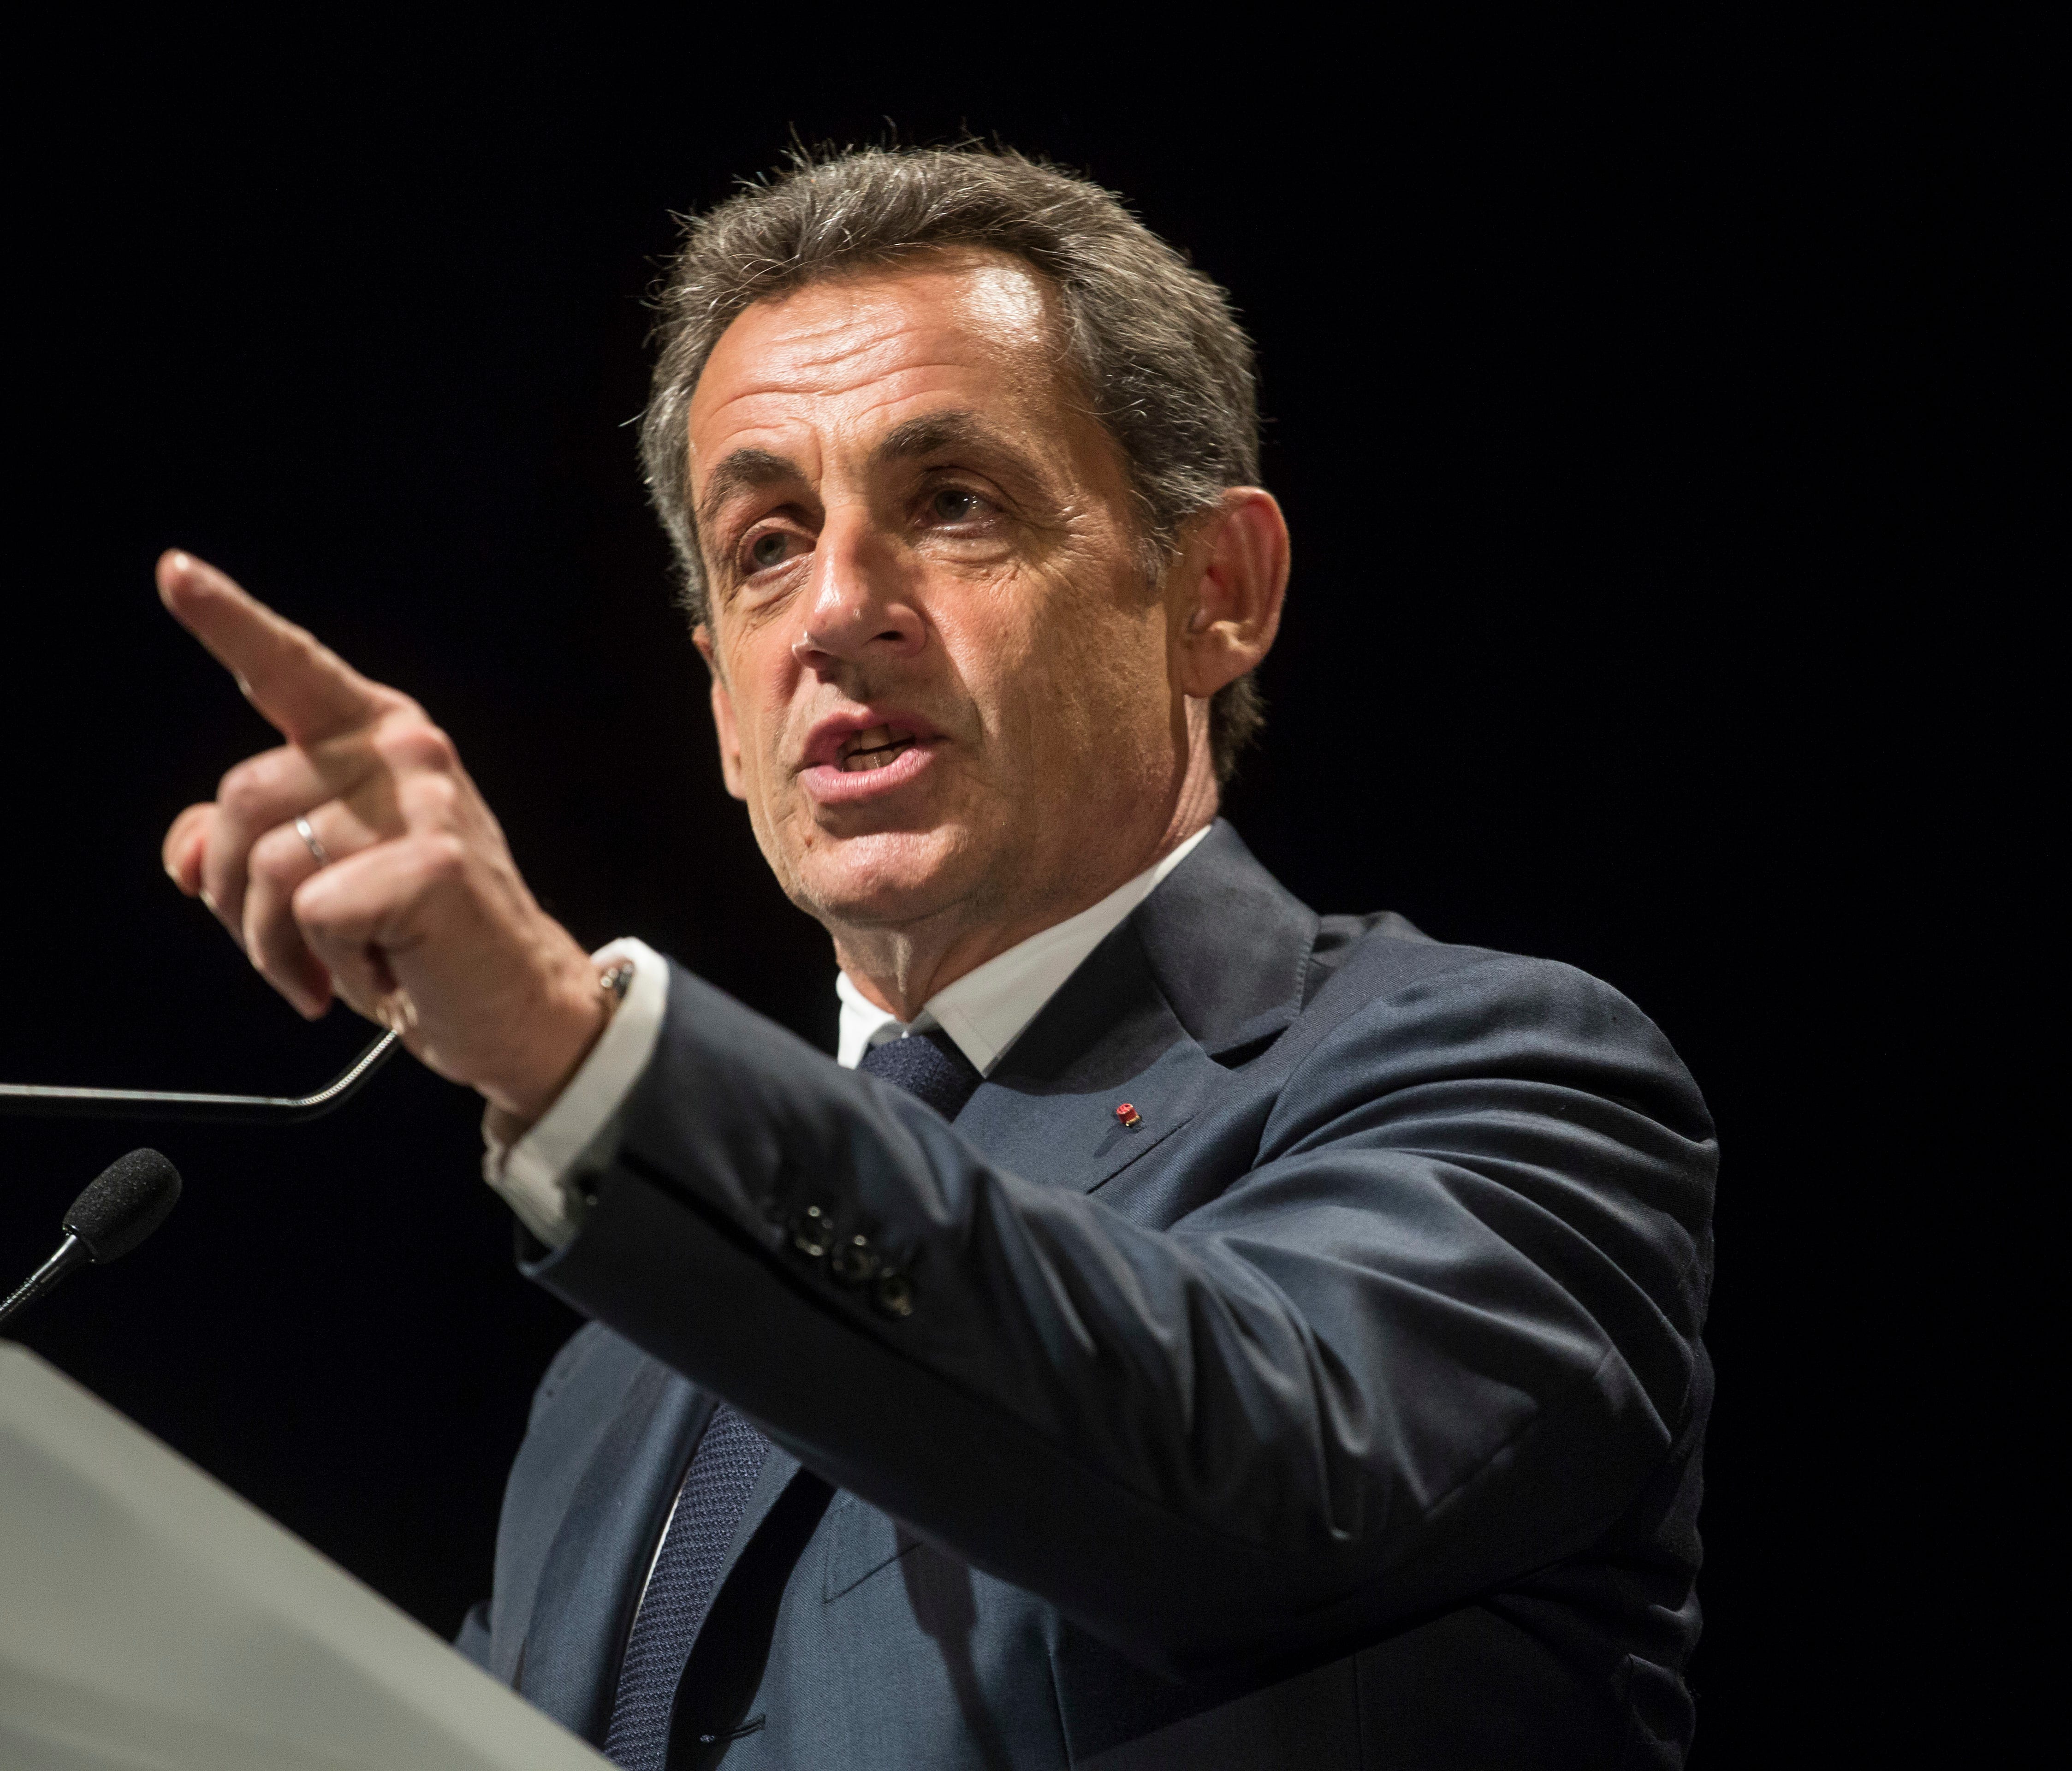 In this Wednesday, Nov. 9, 2016 file photo, former French President and candidate for France's conservative presidential primary Nicolas Sarkozy delivers a speech during a campaign meeting in Meyzieu, near Lyon, central France.